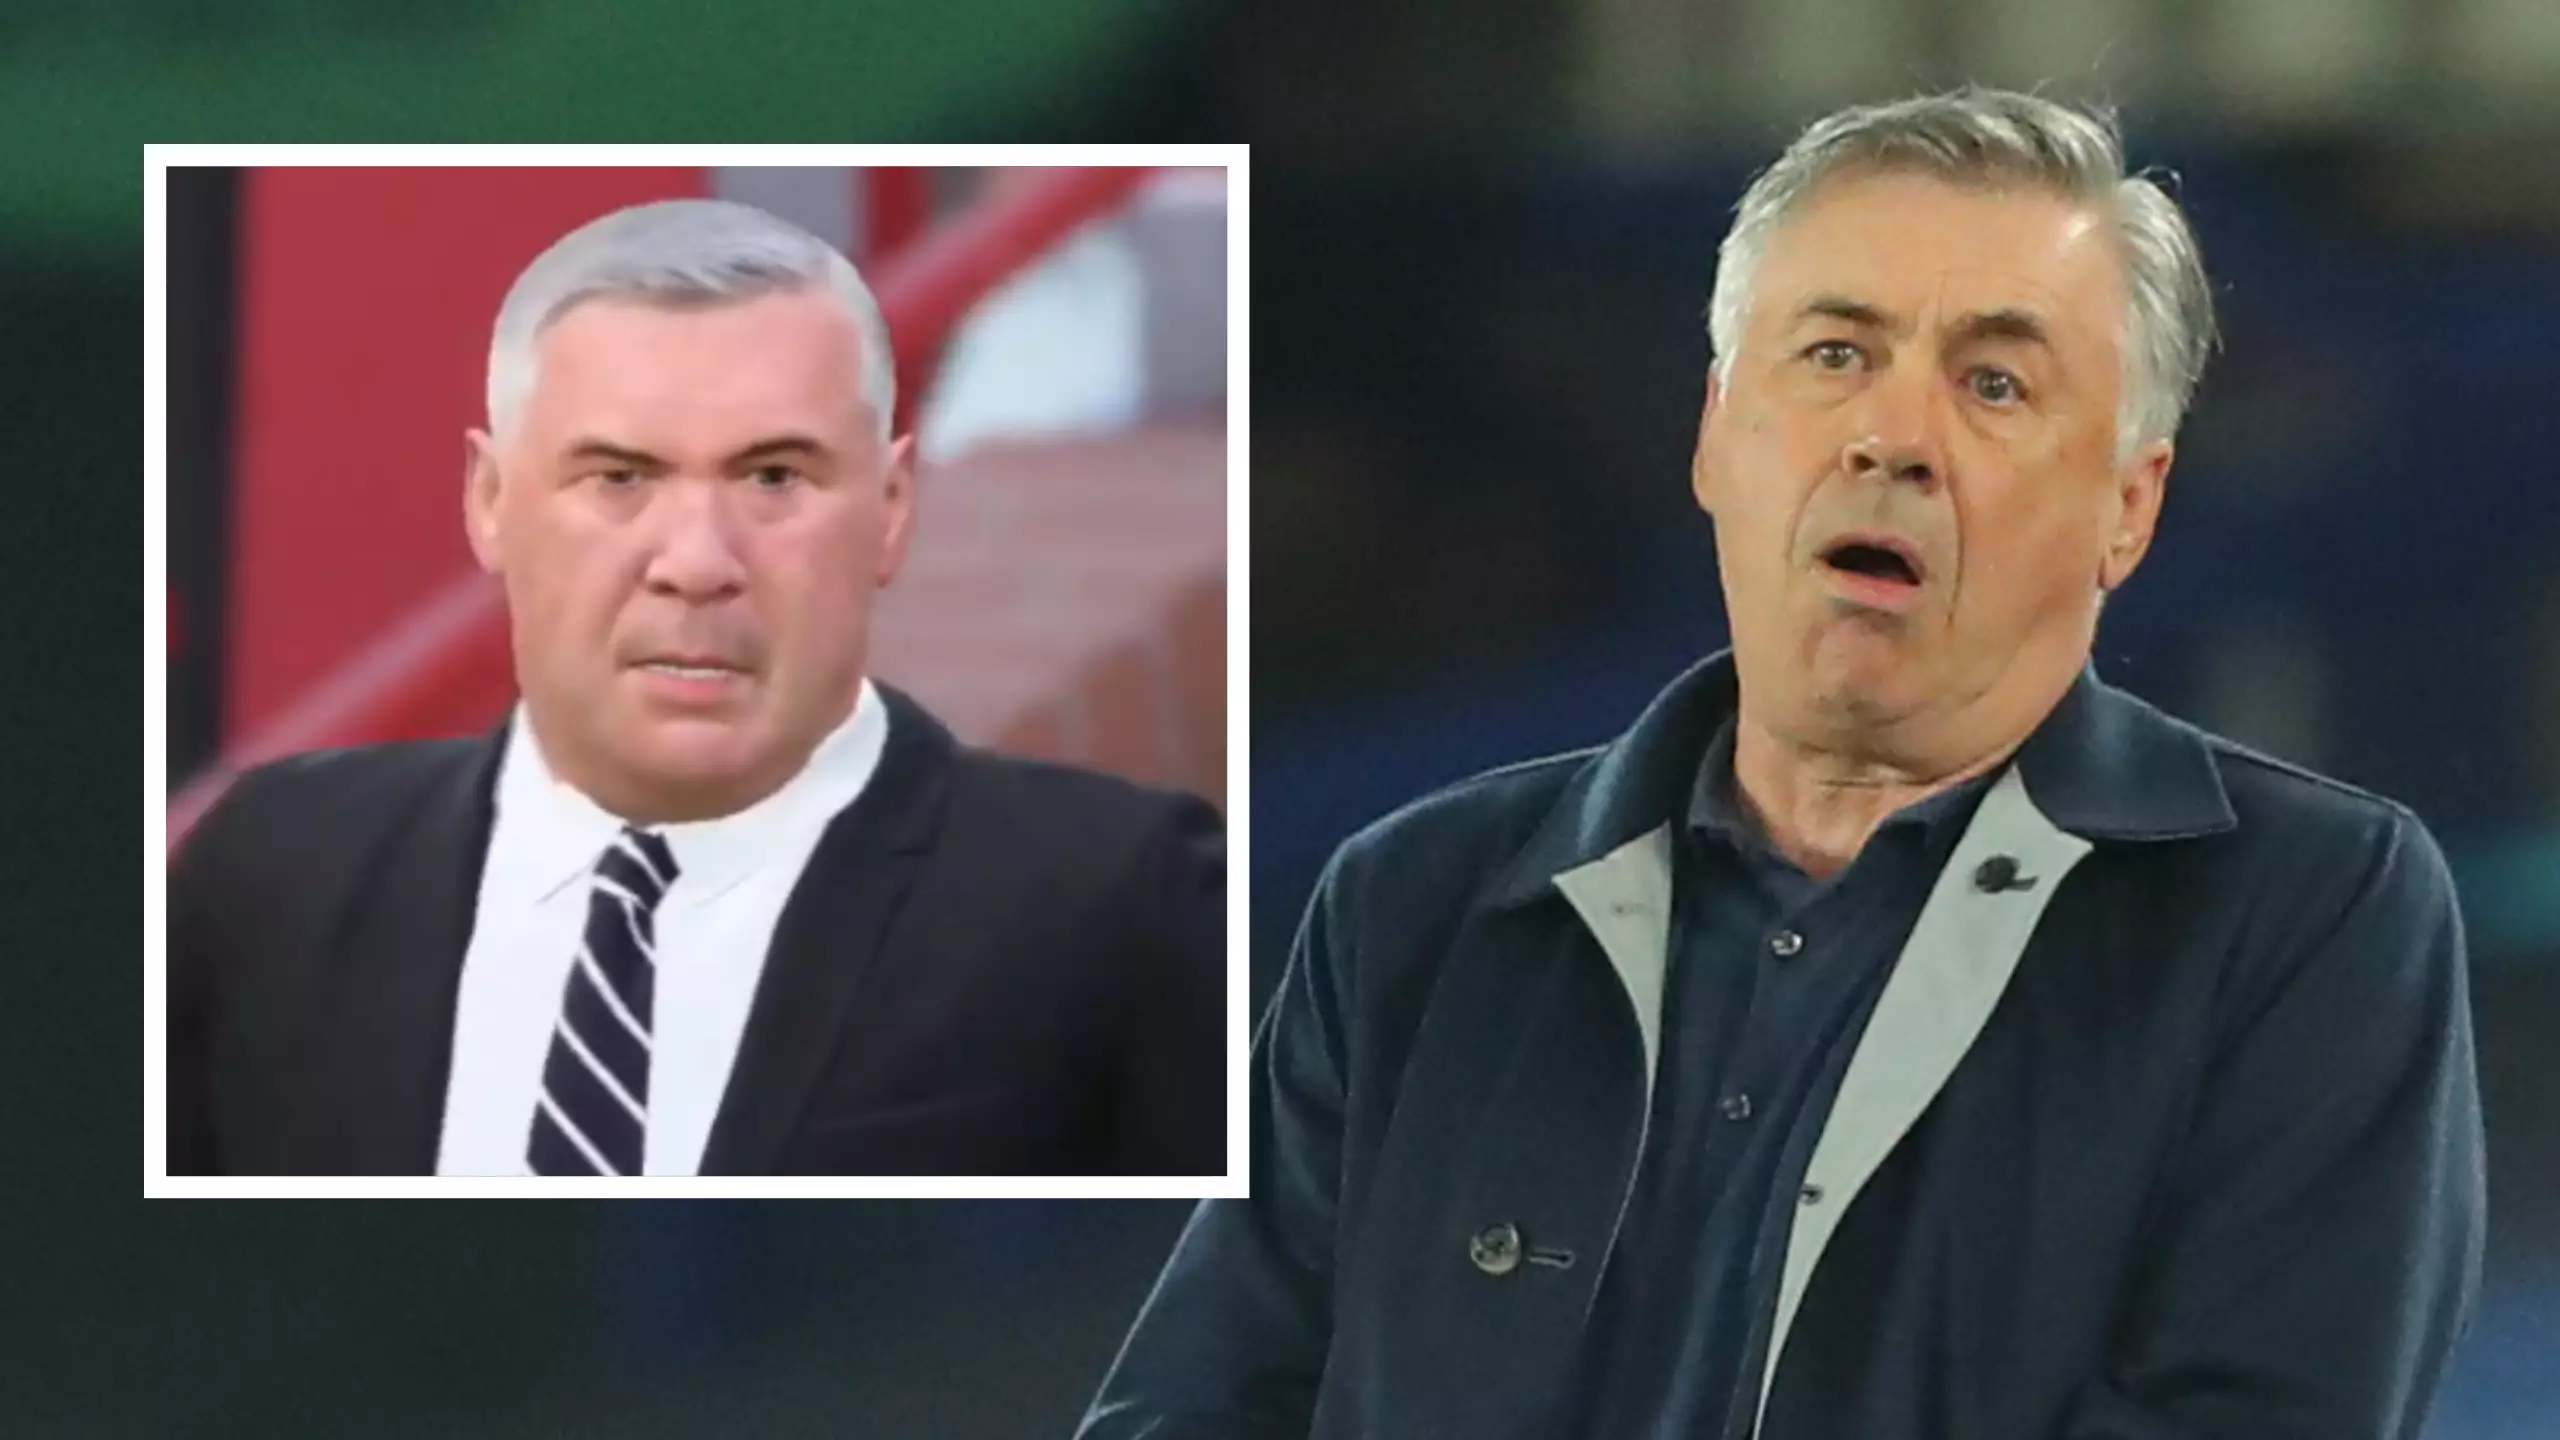 Carlo Ancelotti's FIFA 21 Model Looks Absolutely Nothing Like Him